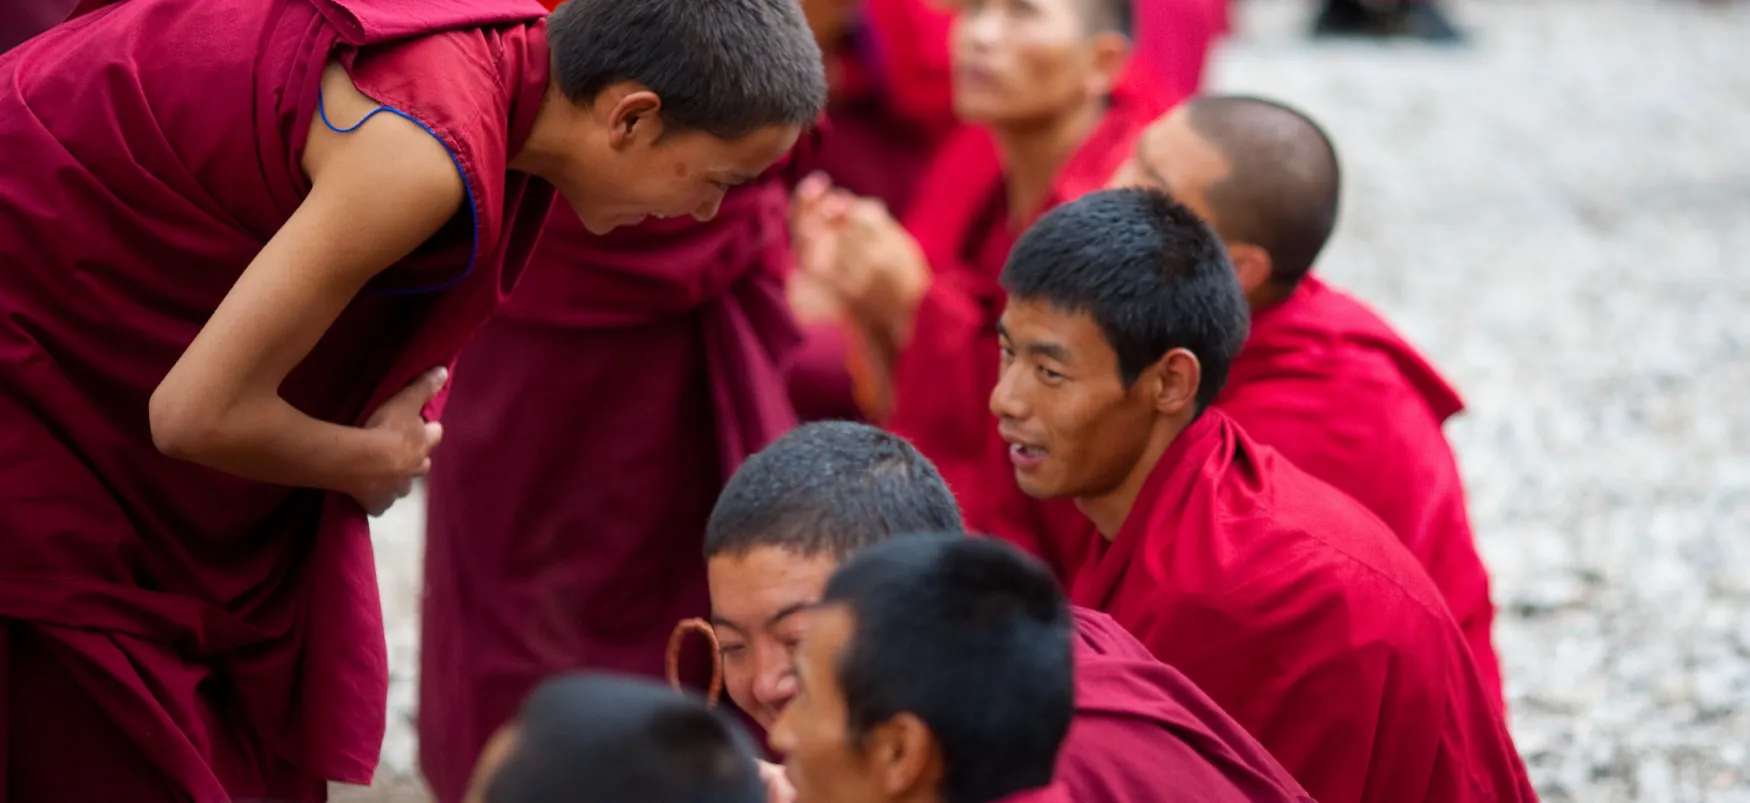 Buddhist monk in red garment bends to speak with other monks in red garments.